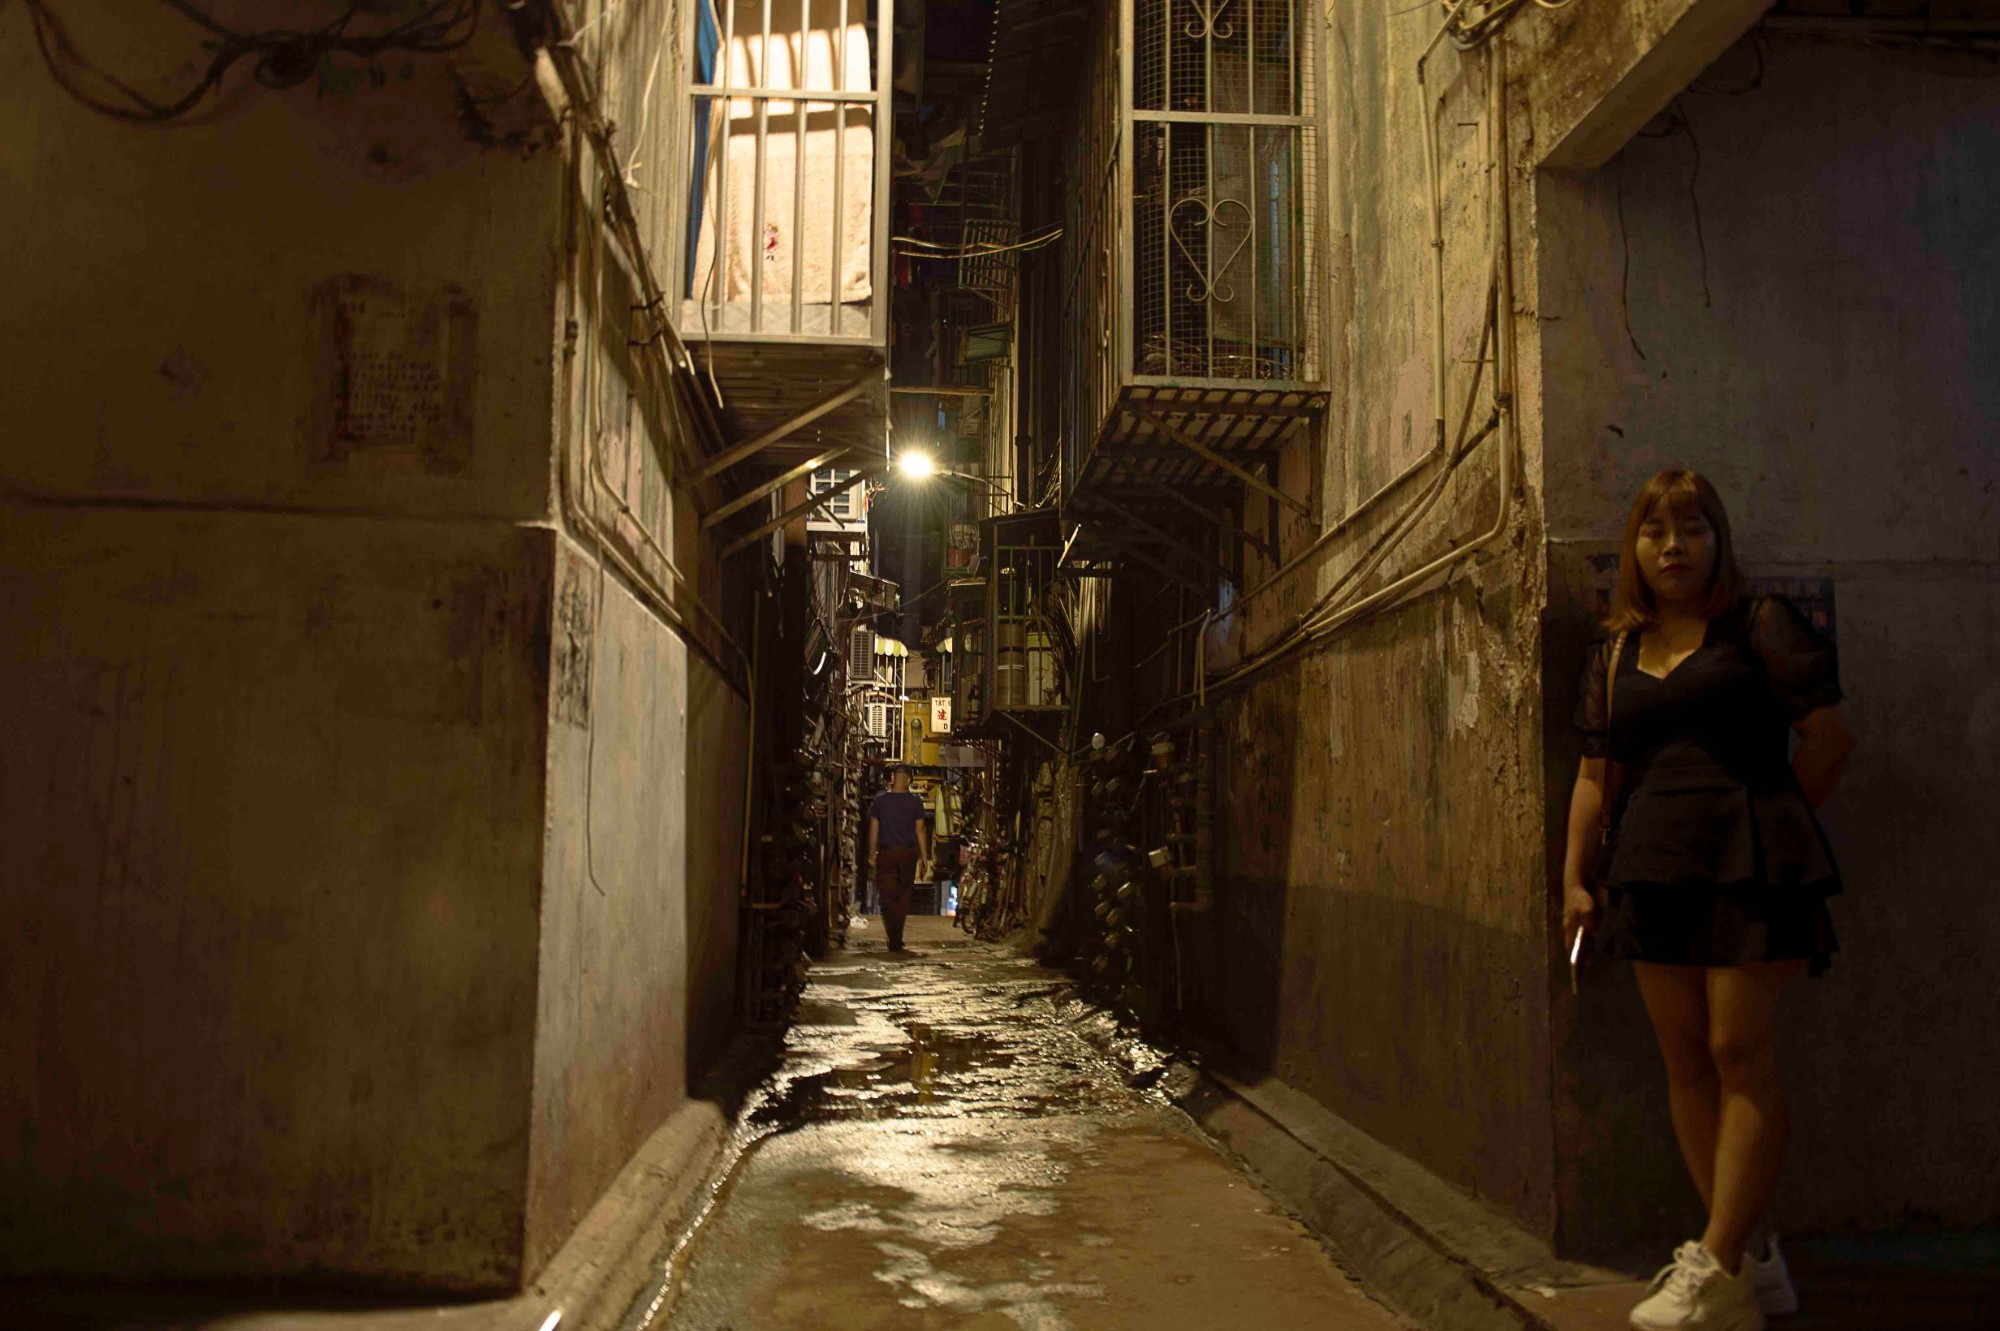 A-woman-waits-outside-her-apartment-down-an-alley-in-central-Macau.-Image-via-That-s-Lars-Hamer.jpeg